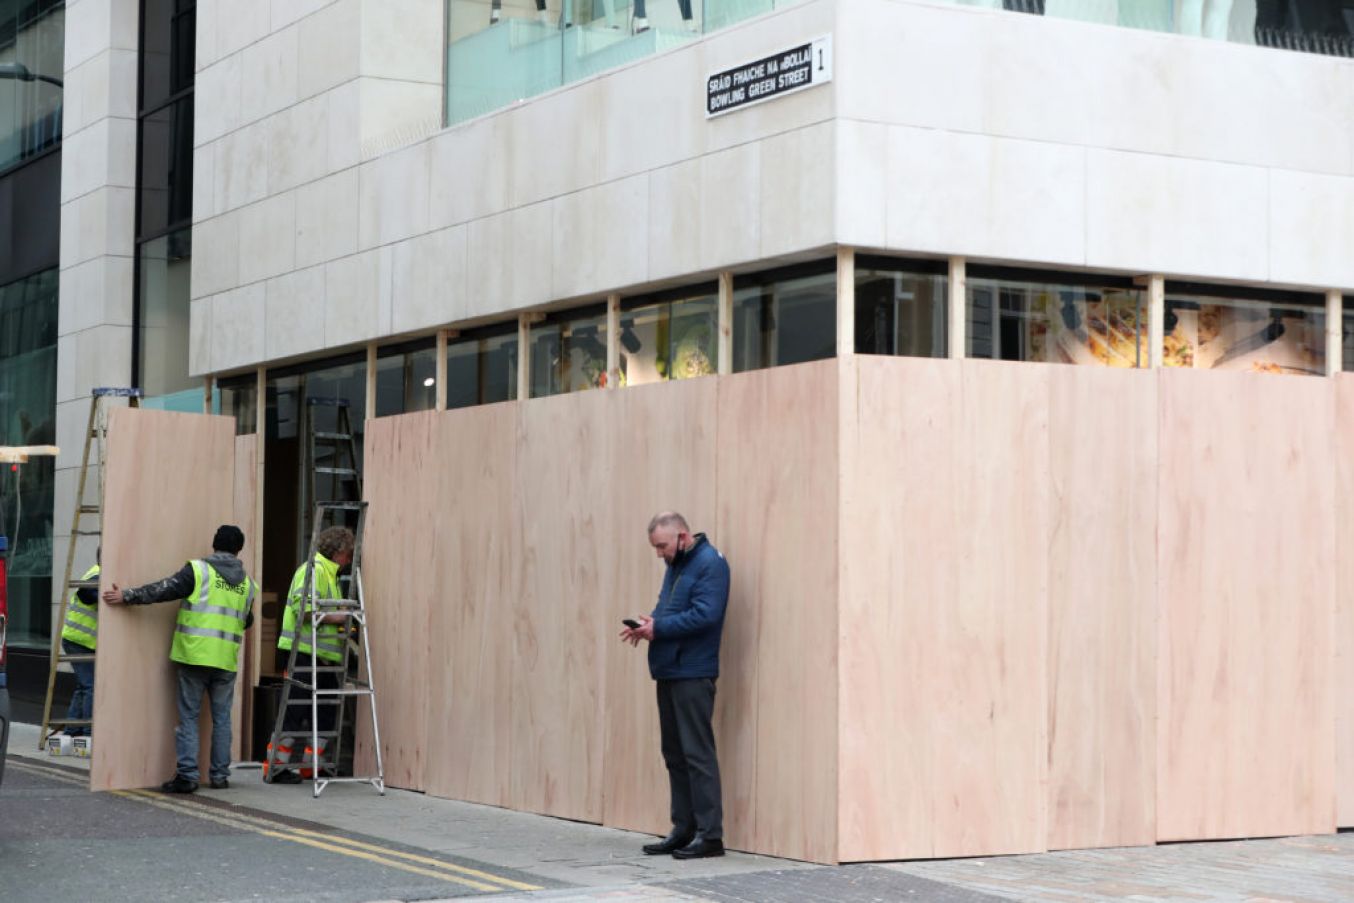 A Store In Cork Boards Up Its Windows Ahead Of The Demonstration. Photo: Pa Images.